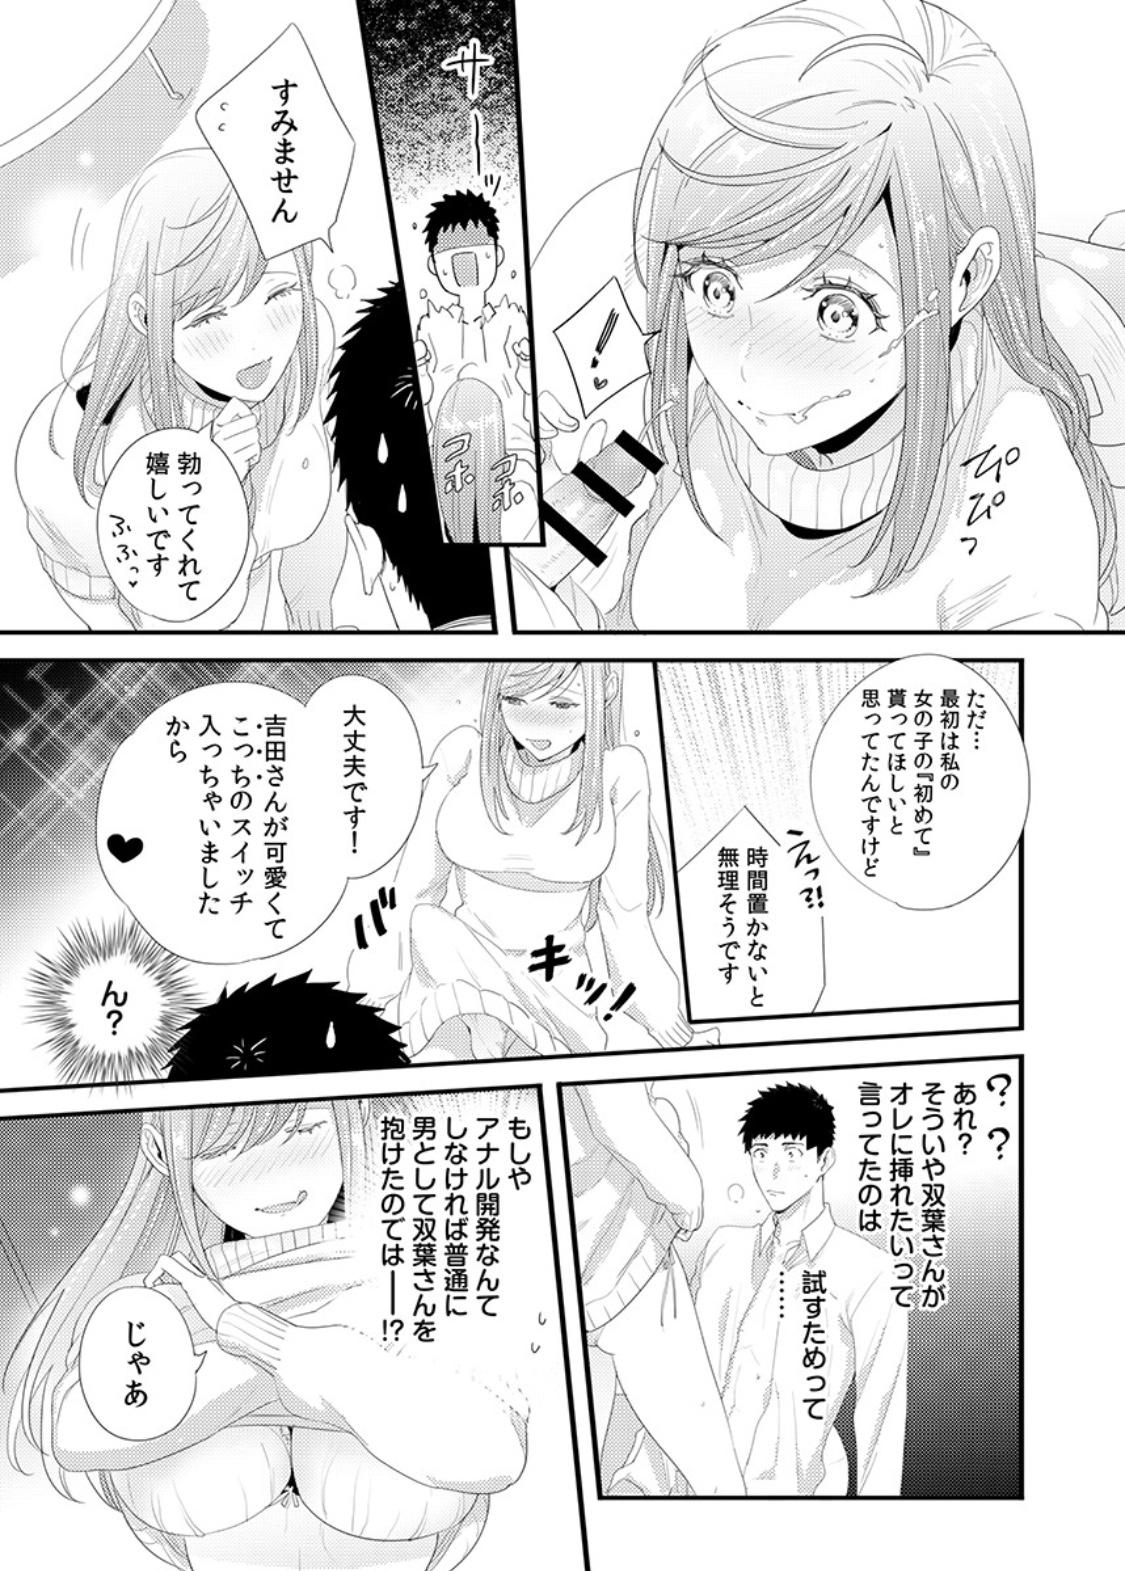 Please Let Me Hold You Futaba-San! Ch. 1-4 50